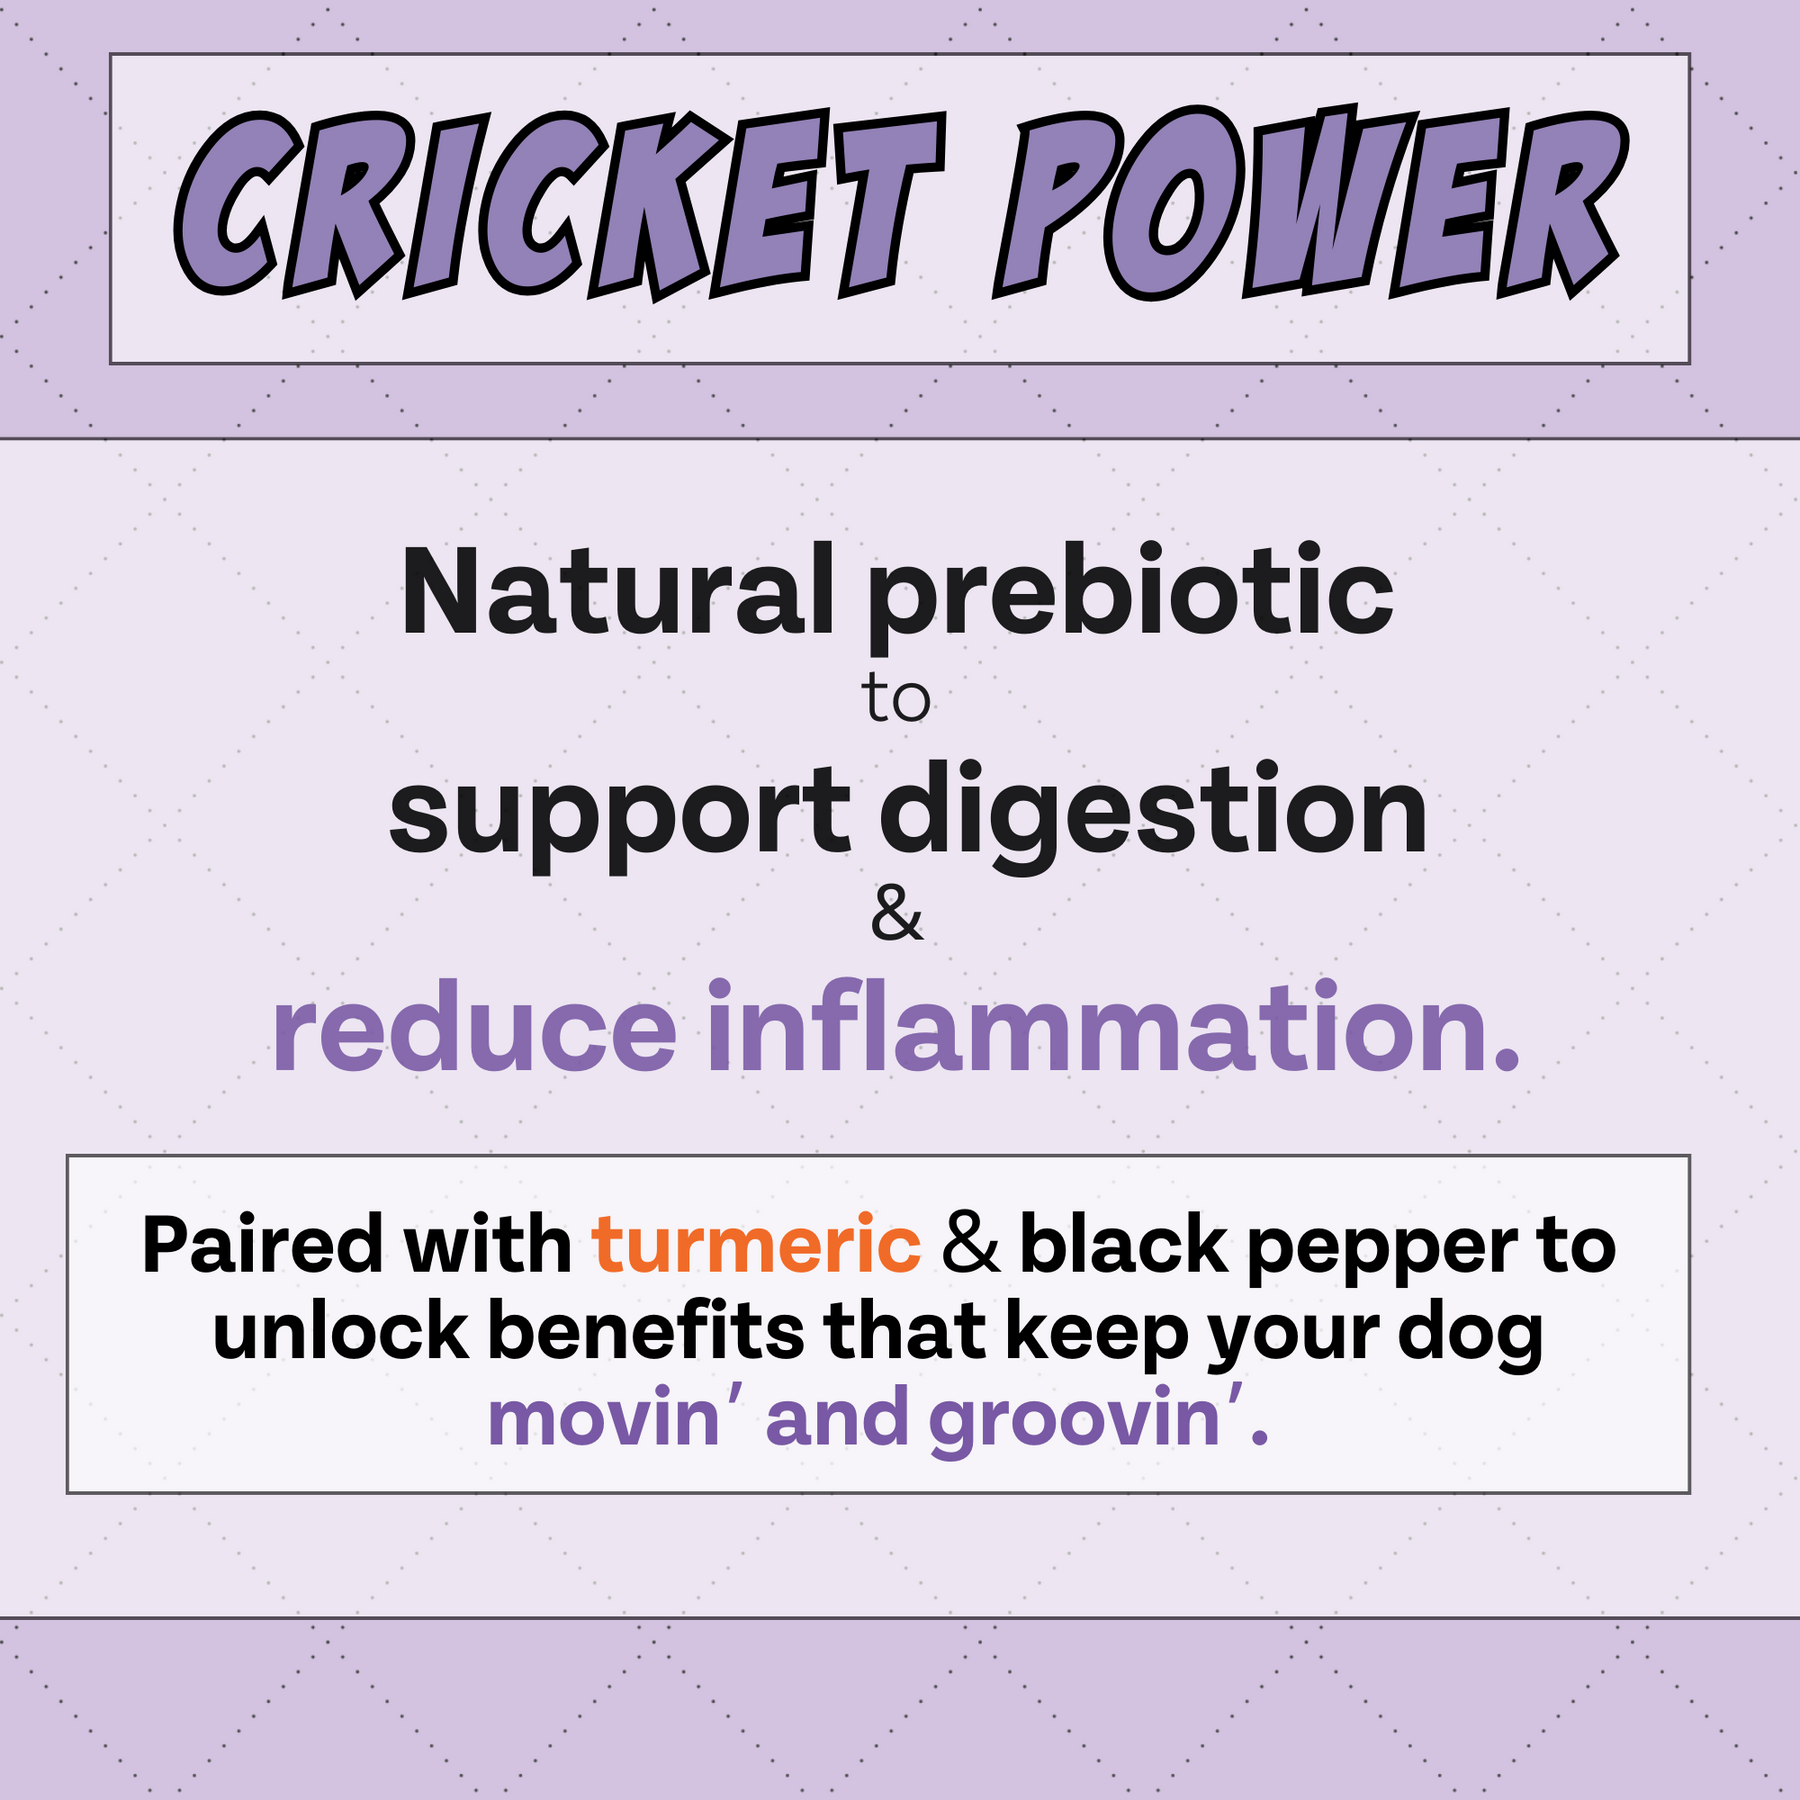 Cricket powder title with mention of natural prebiotic and digestive support to reduce inflammation.